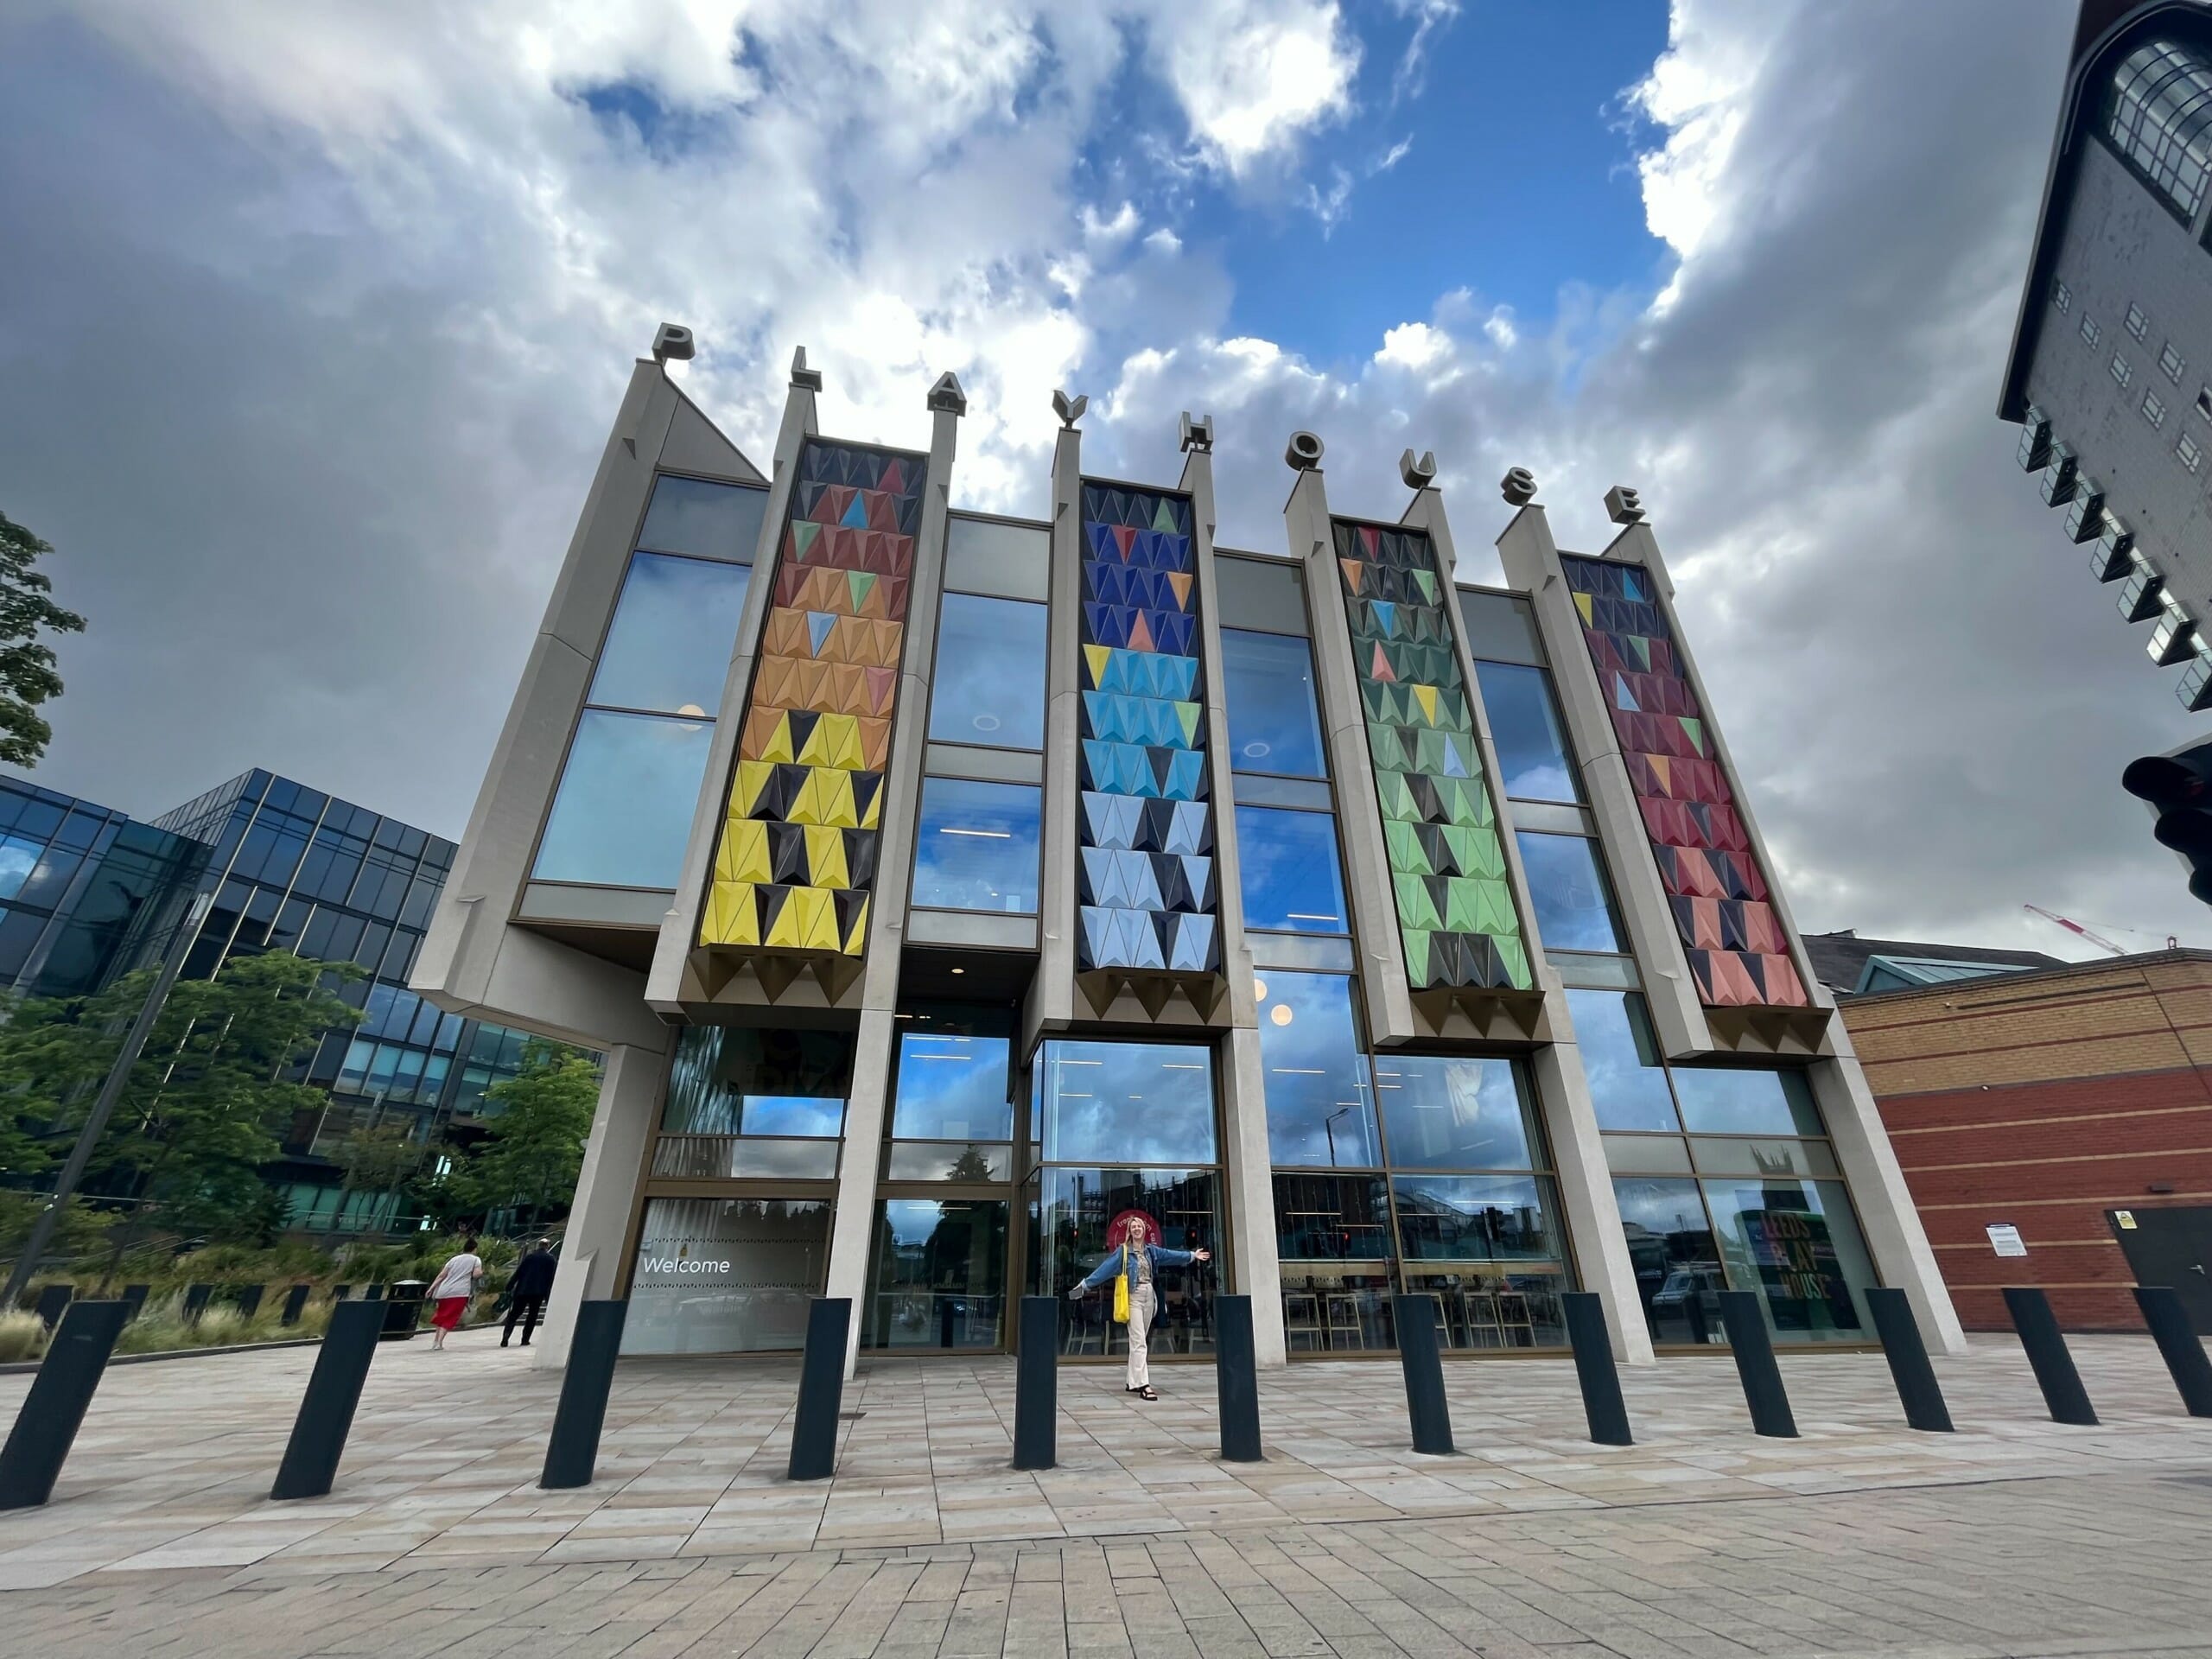 Emma, a blonde haired woman wearing a denim jacket, stands with her arms out wide in front of the Leeds Playhouse. The bright coloured facade of the building and sunshine is reflected onto the glass windows of the building.